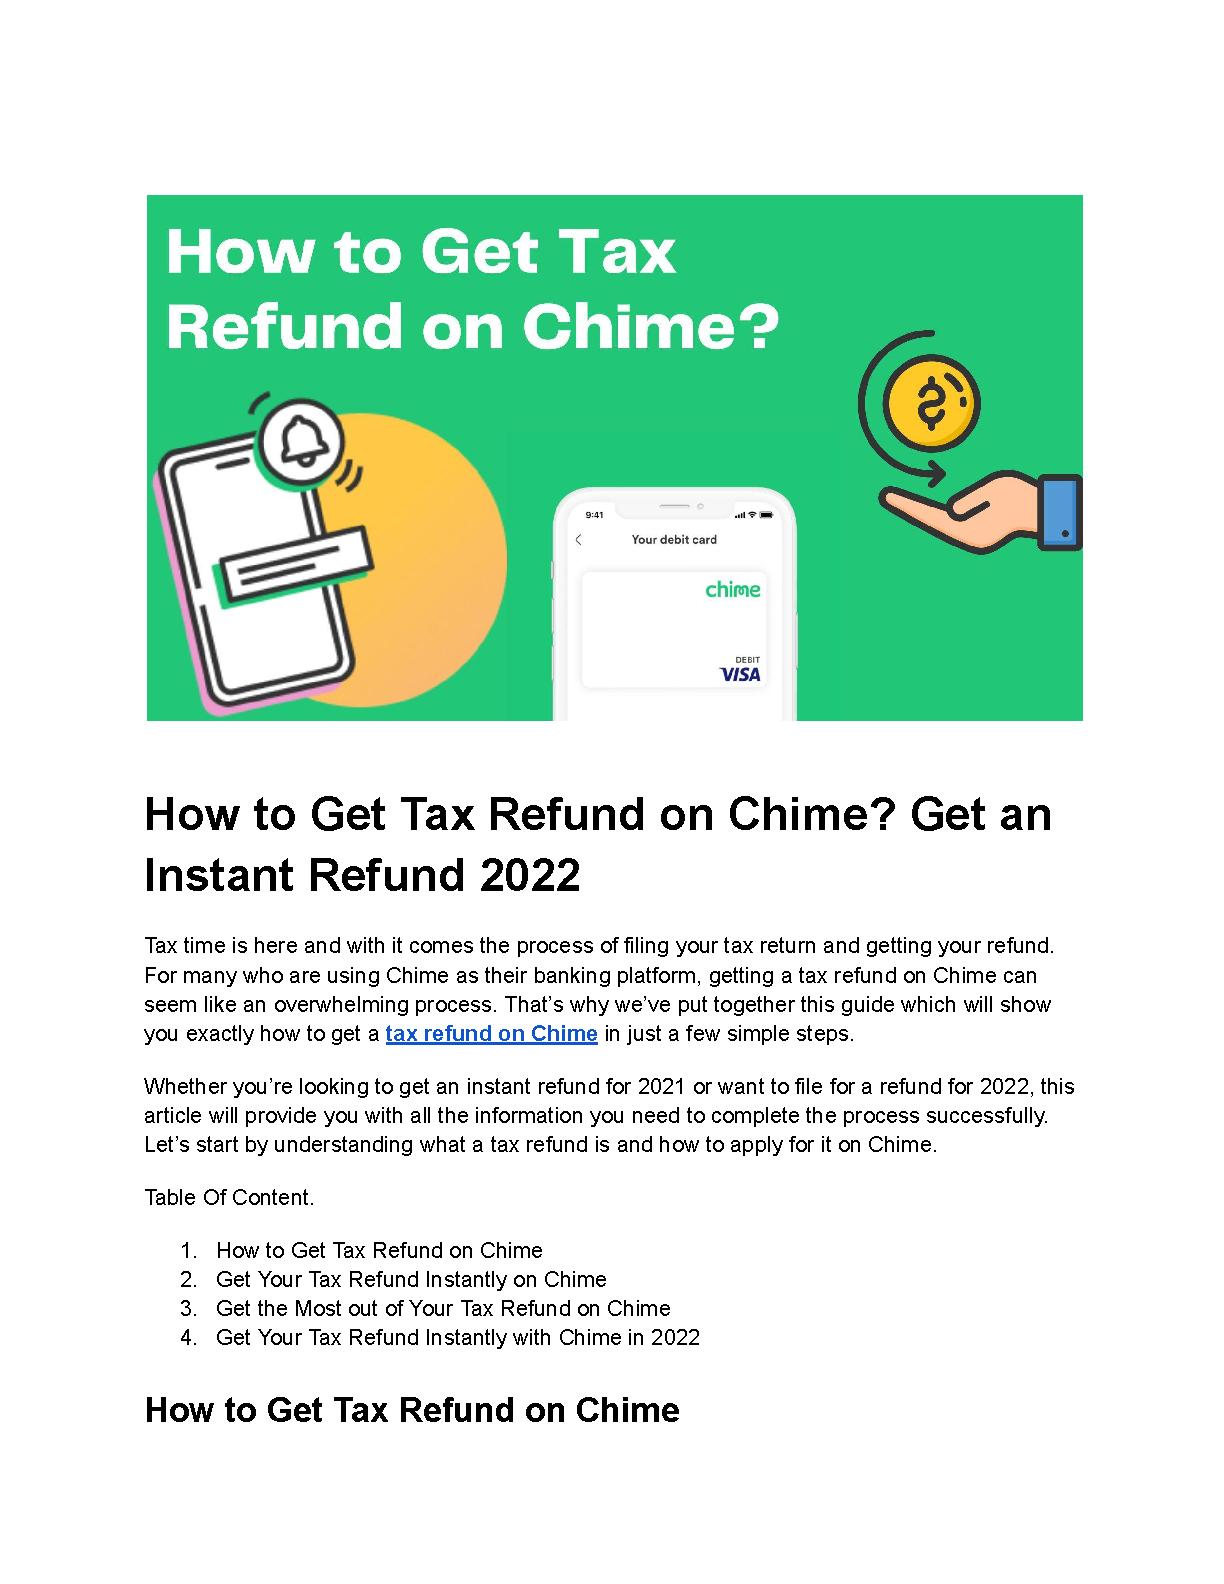 How to Get Tax Refund on Chime PDF Host